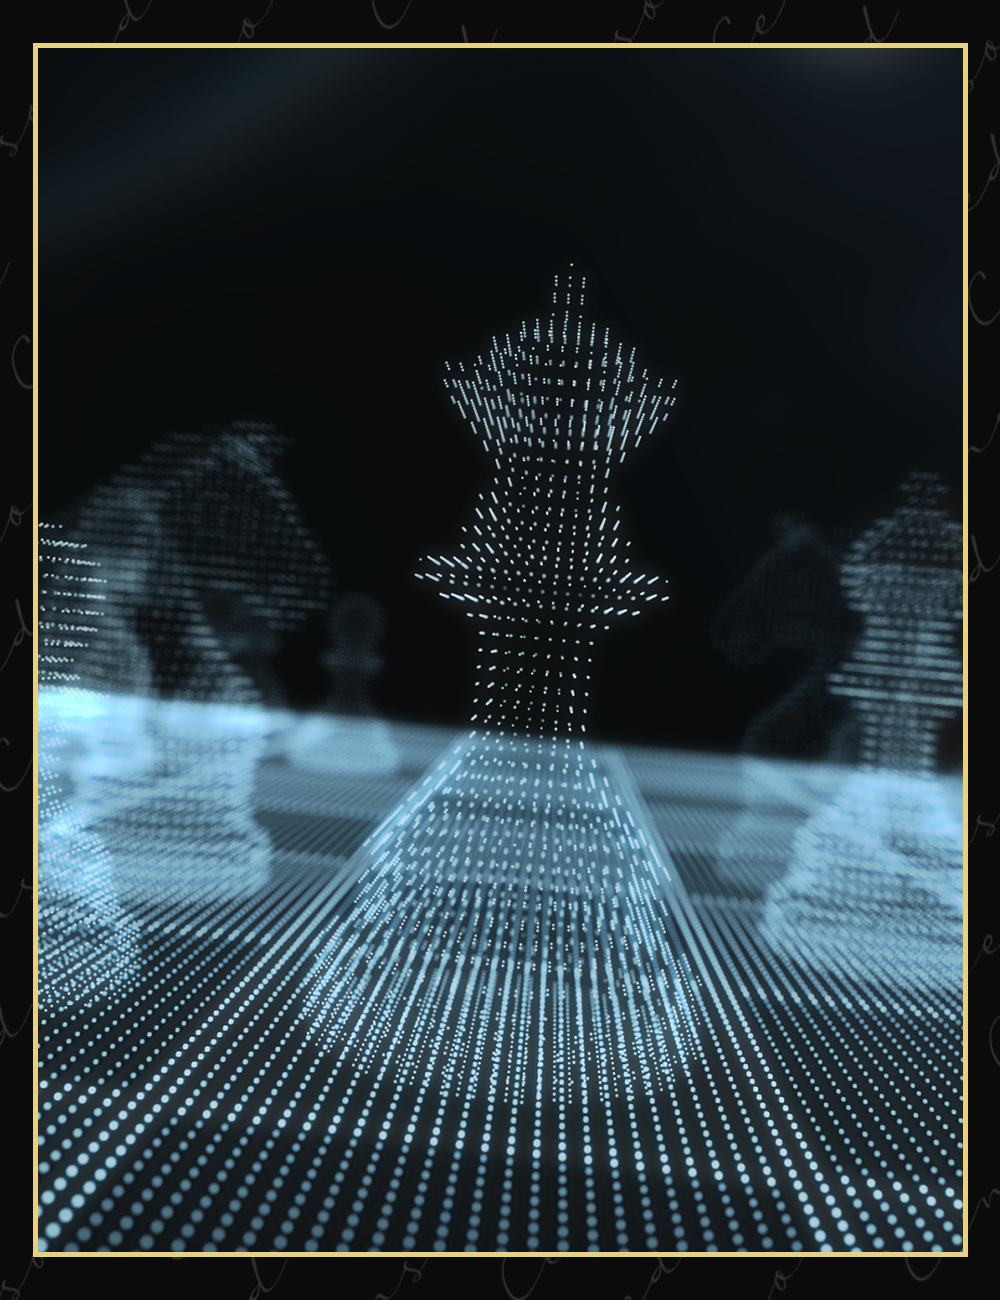 Sci-Fi Holographic Chess Set by: Censored, 3D Models by Daz 3D